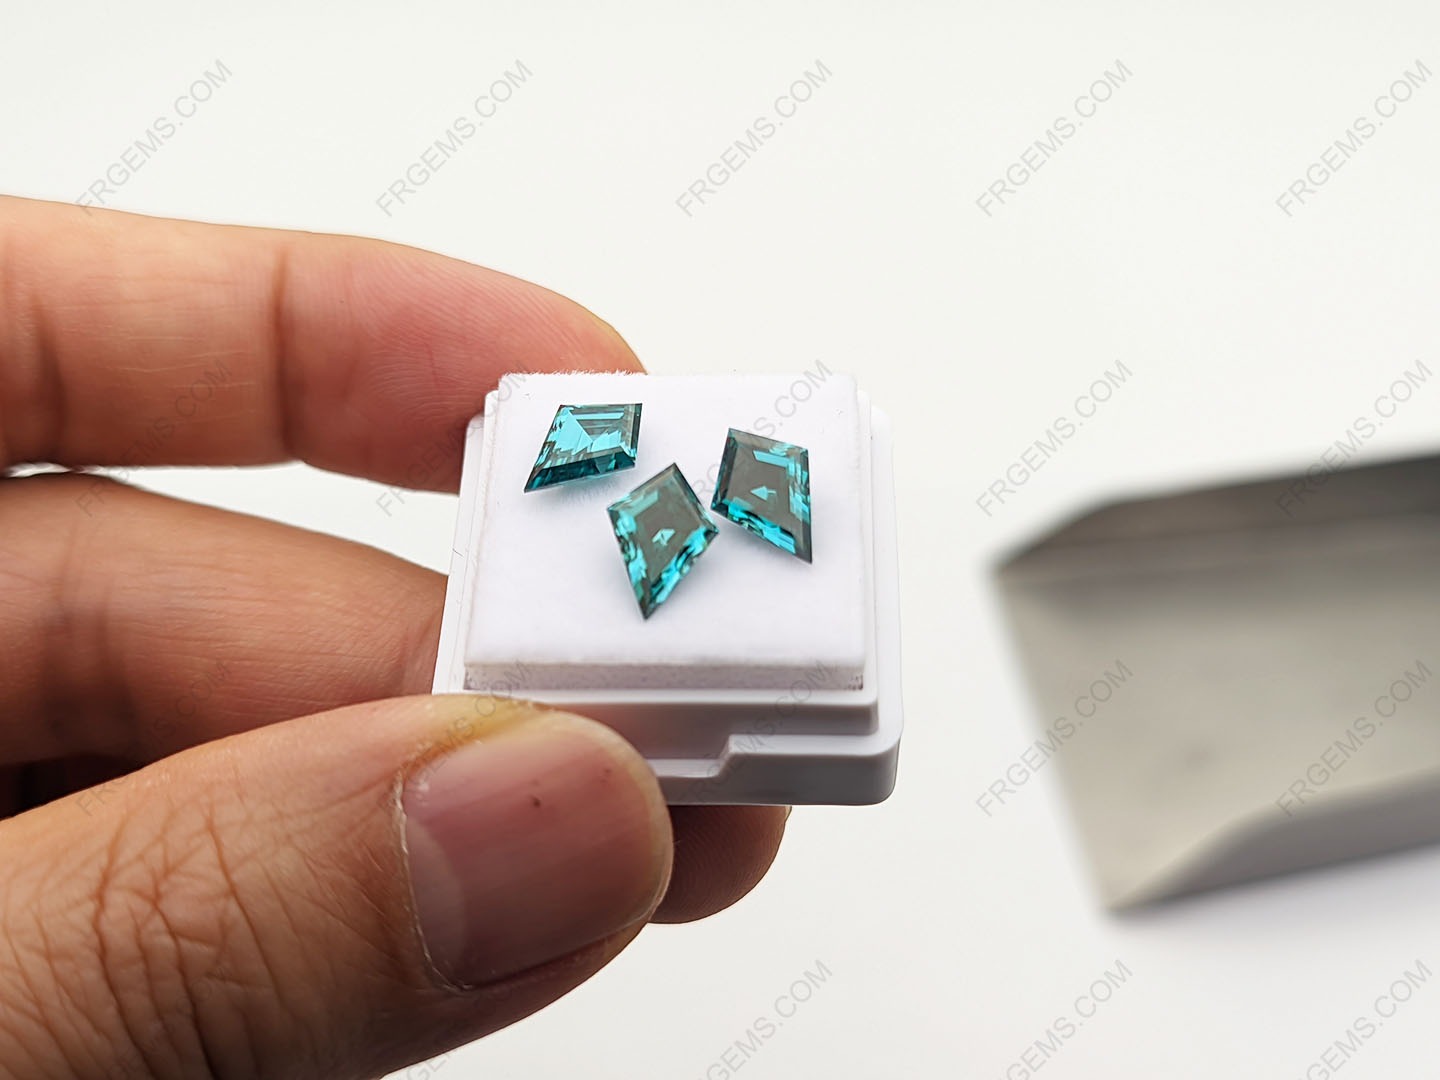 Wholesale Loose Moissanite Green Color Kite Shape Step Cut 10x8mm gemstones from China